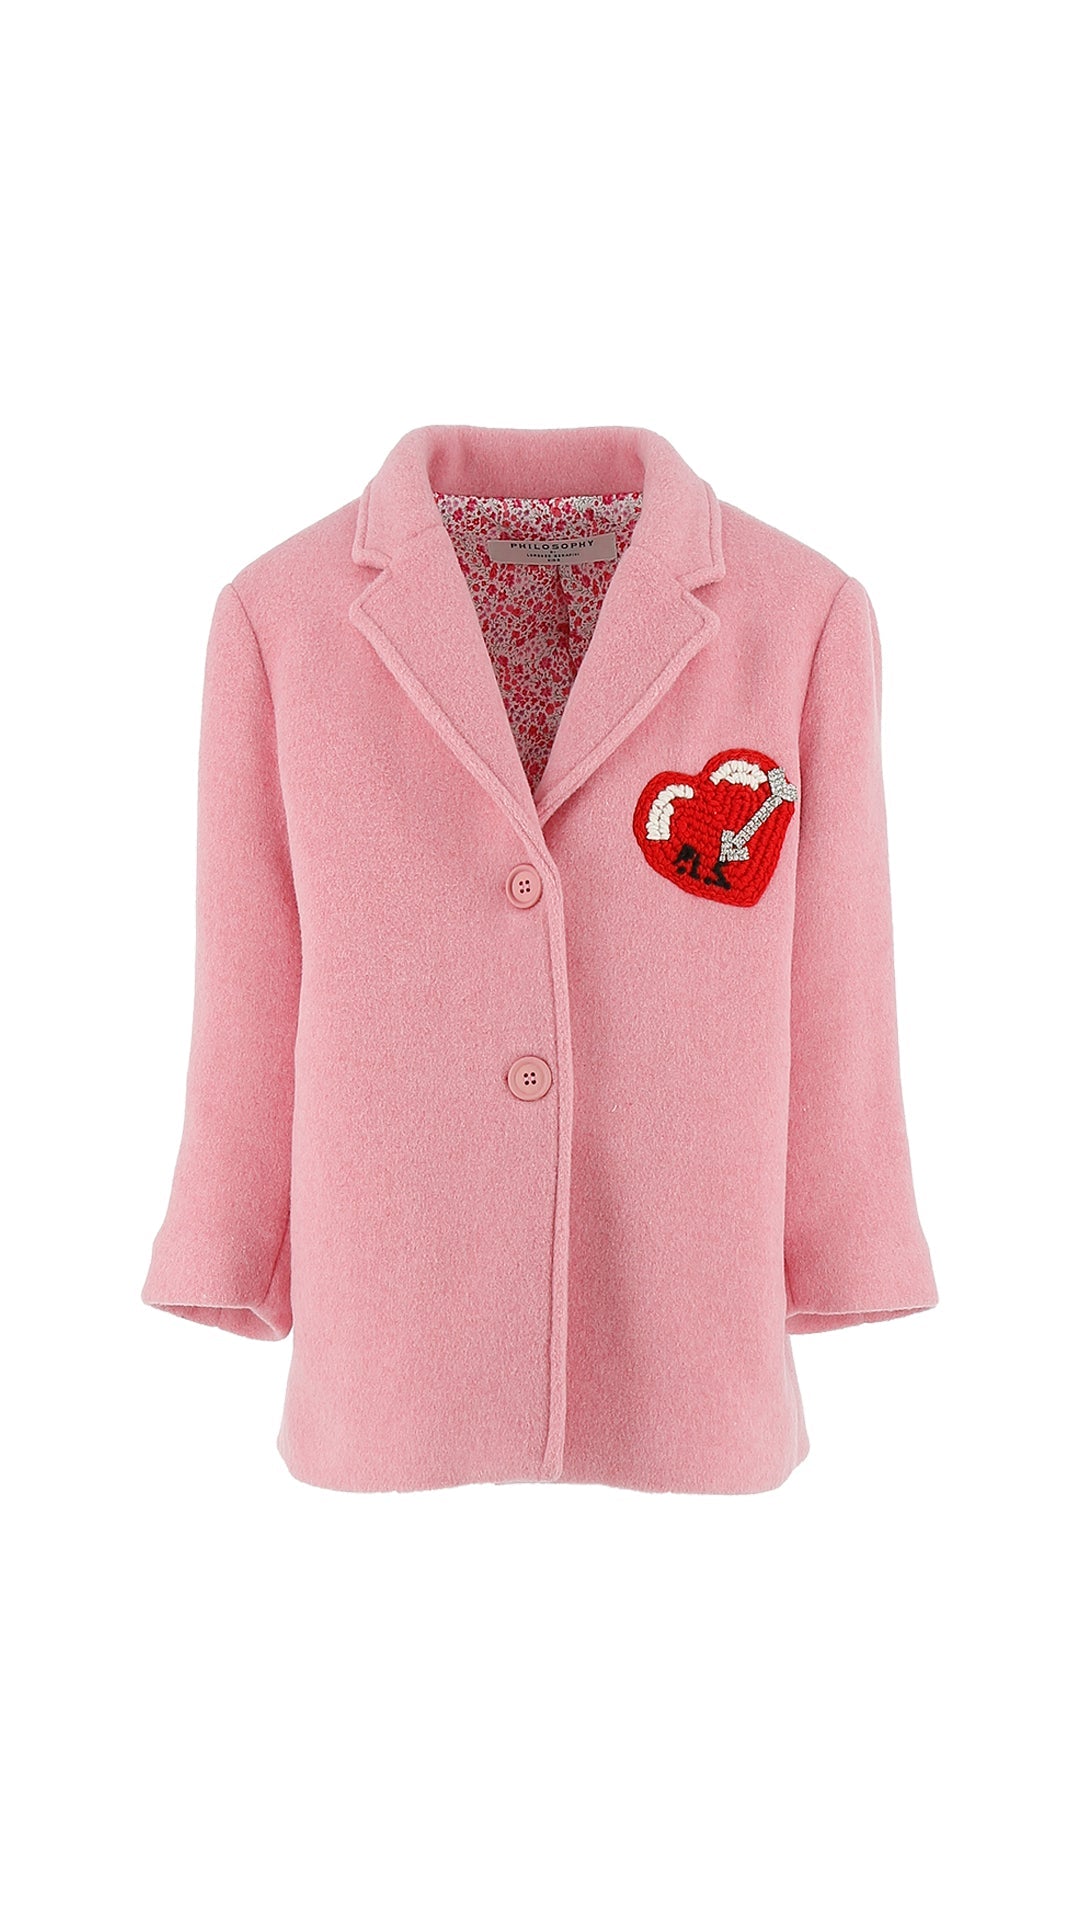 Sleeve Wool Coat With Heart Logo Patch Detail - C144 Bright Pnk - Posh New York